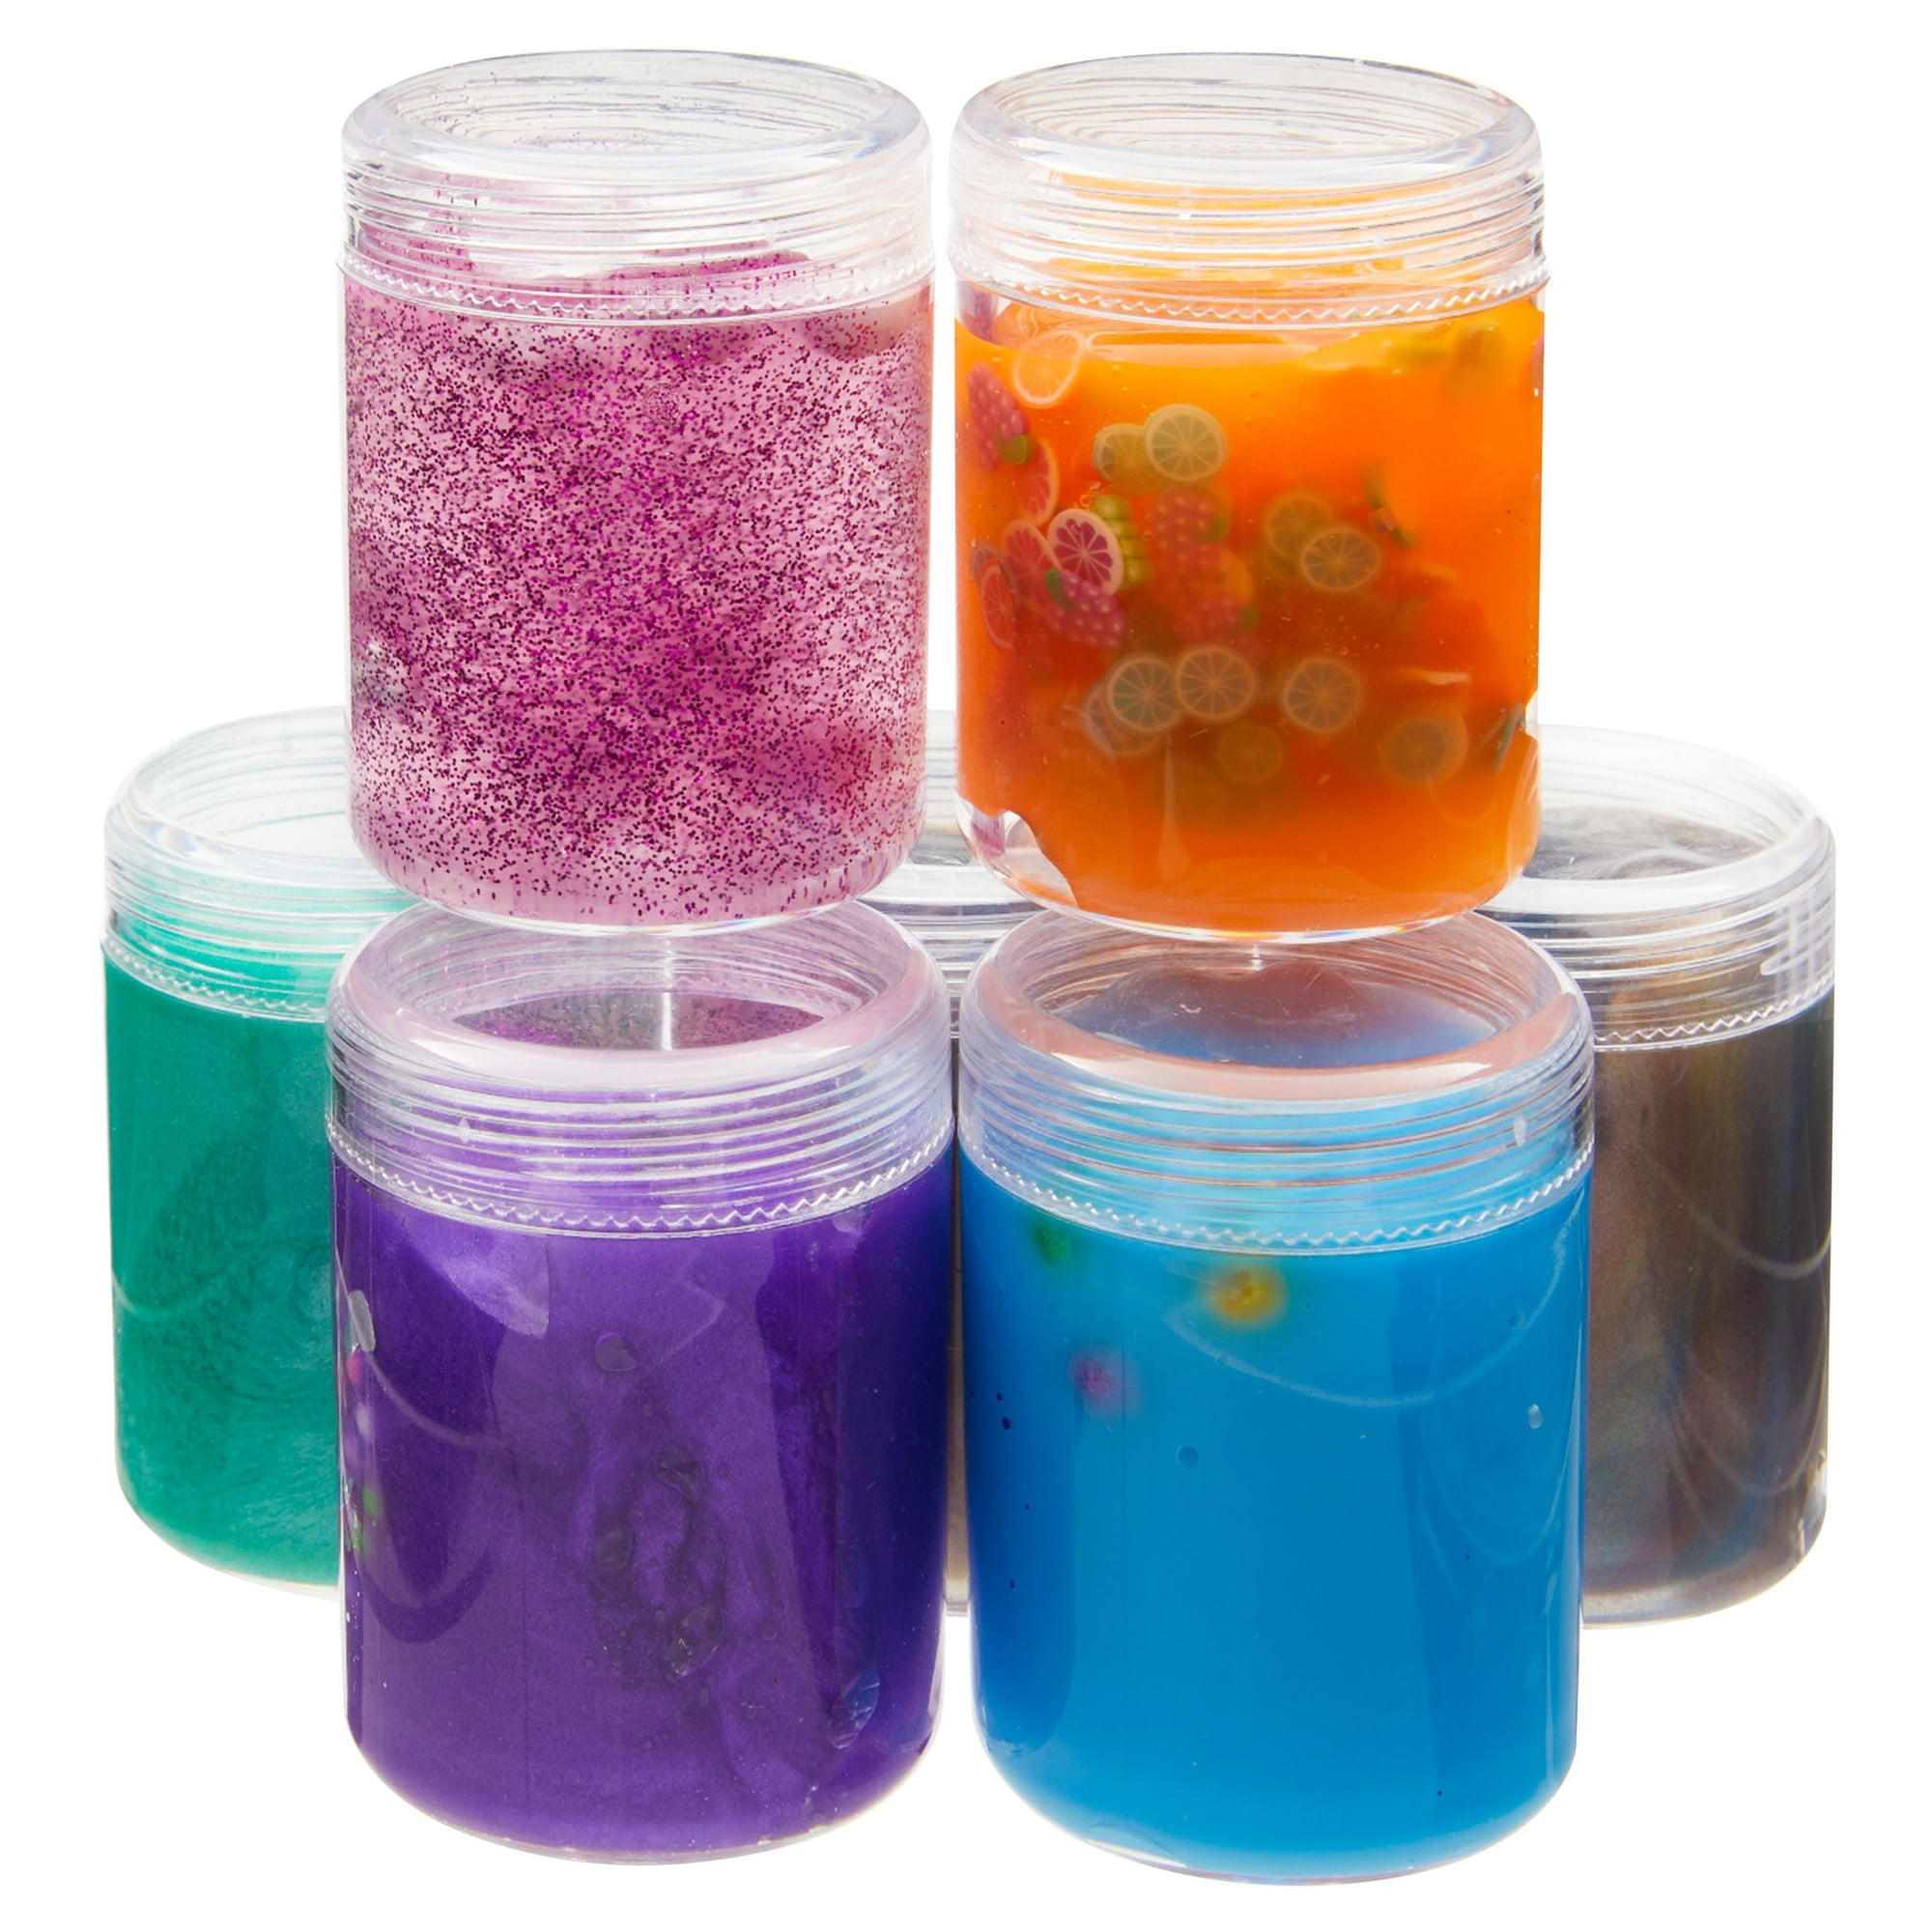 AAOMASSR 8 Pack 12 Oz Clear Plastic Jars with Lids, Slime Containers for  Kids DIY Crafts 